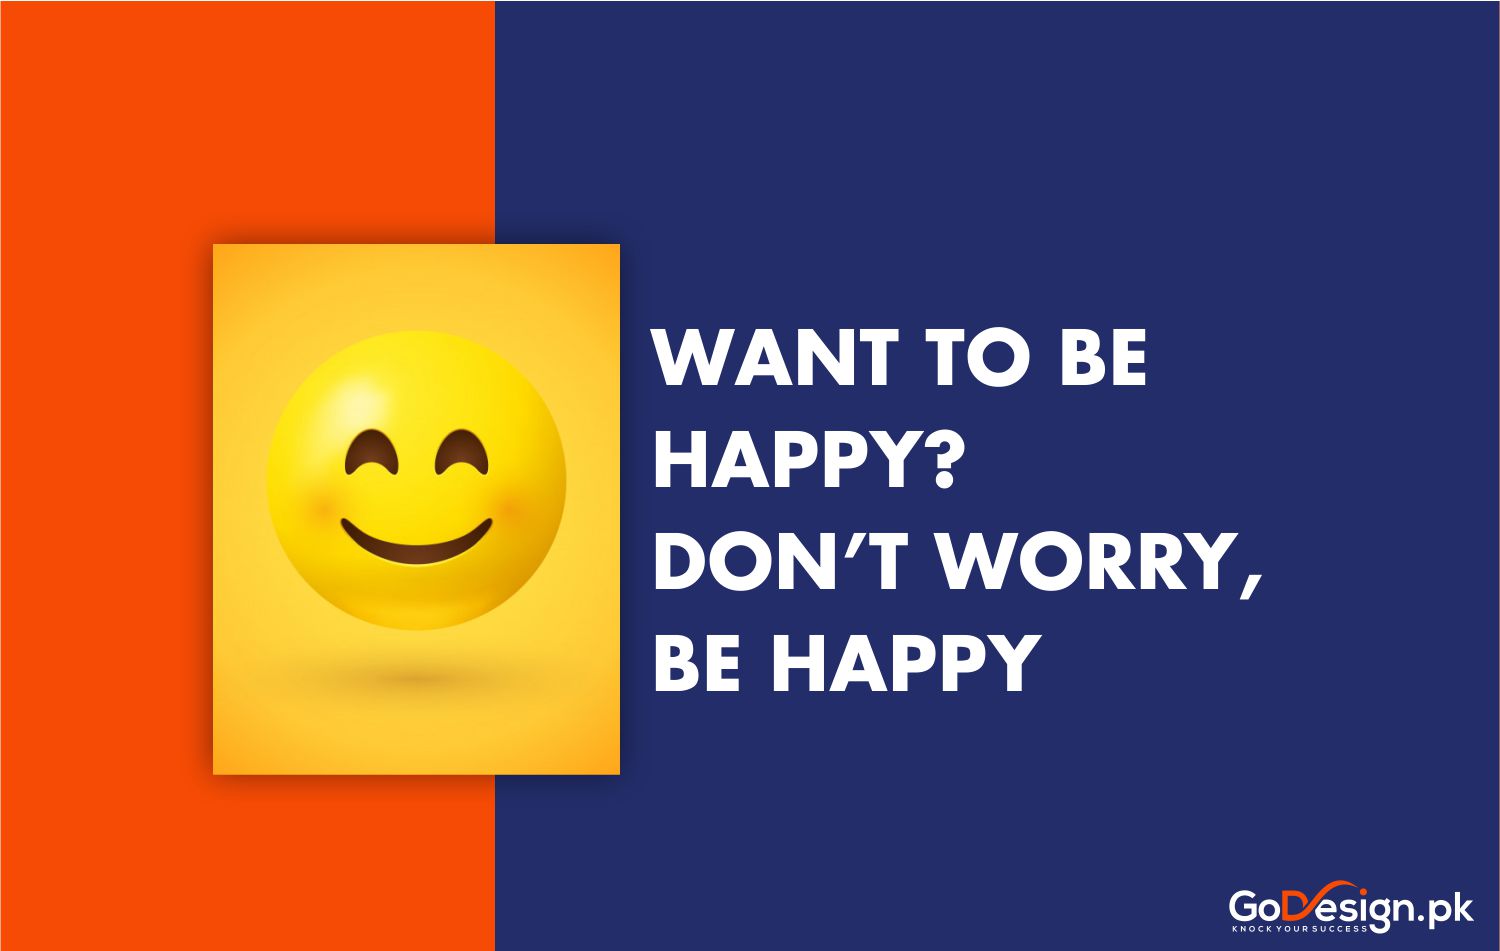 Want to be happy, dont worry be happy